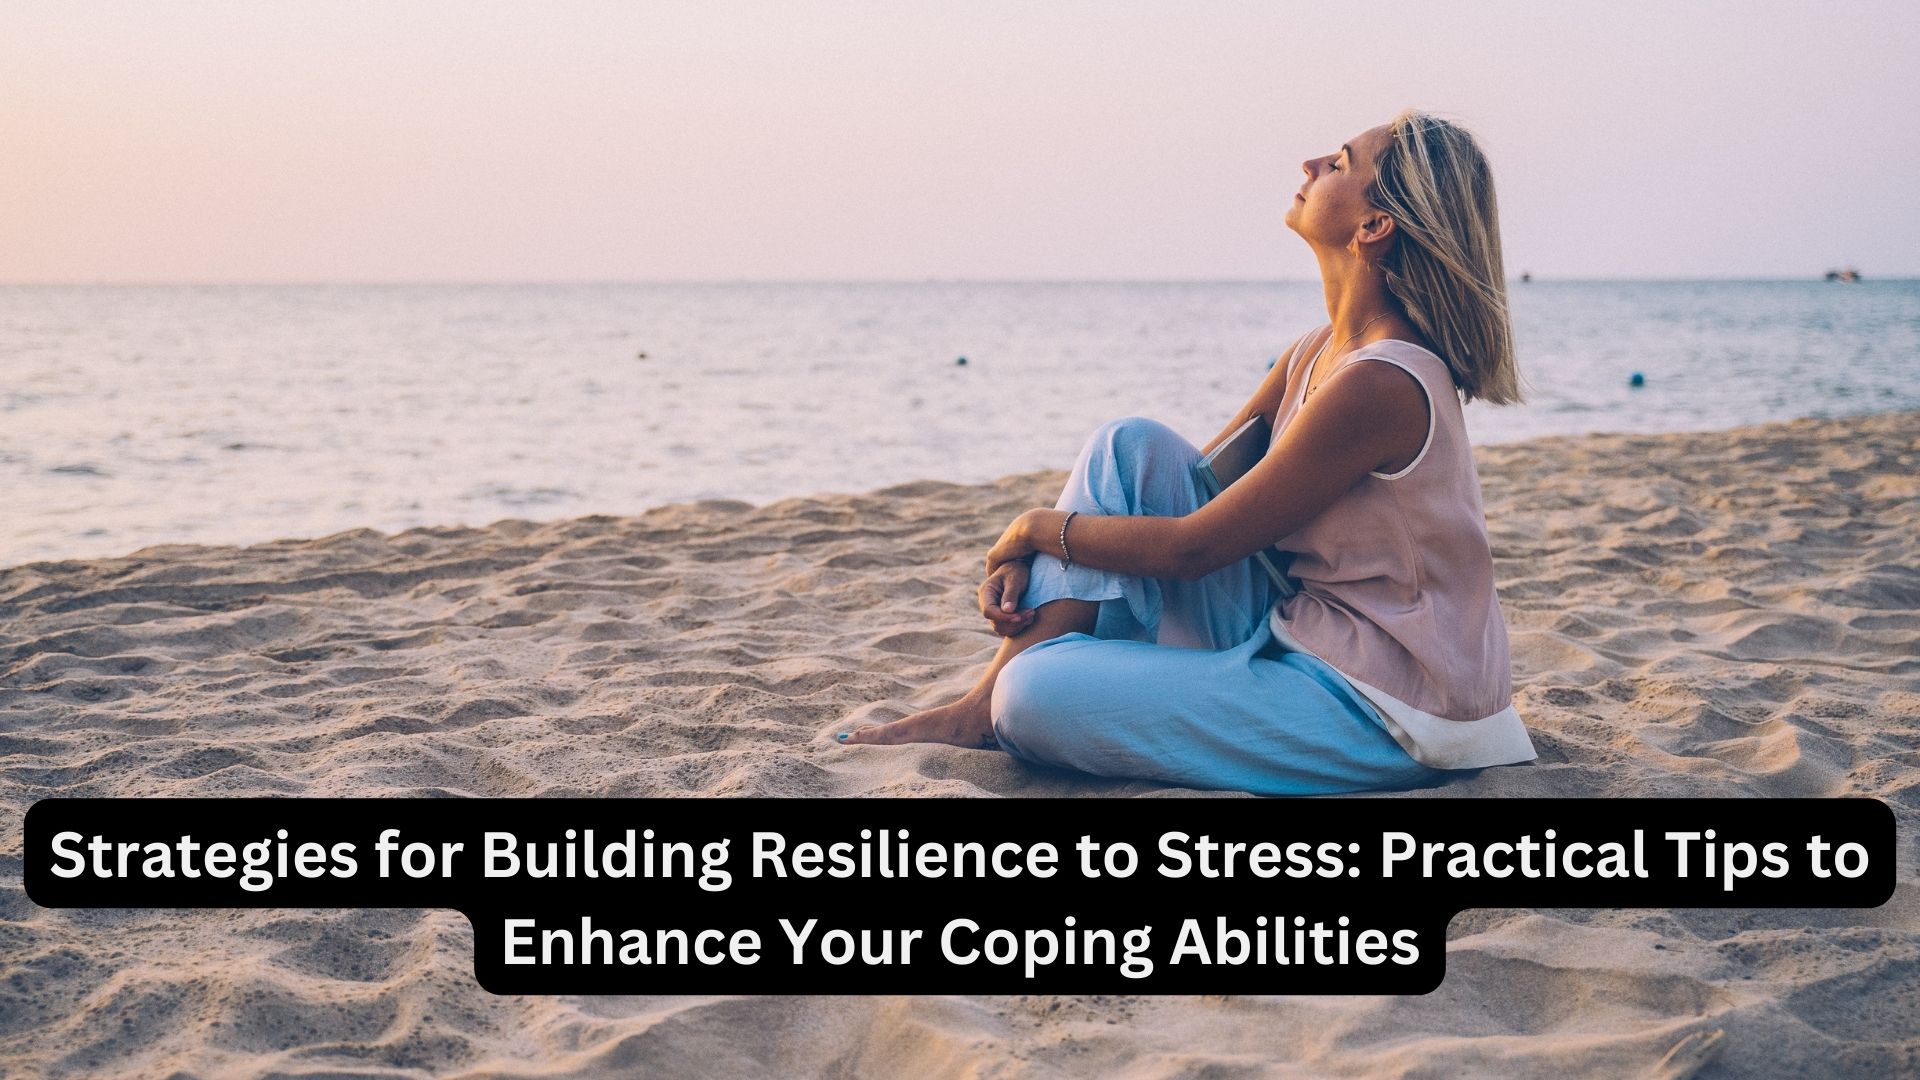 Strategies for Building Resilience to Stress: Practical Tips to Enhance Your Coping Abilities